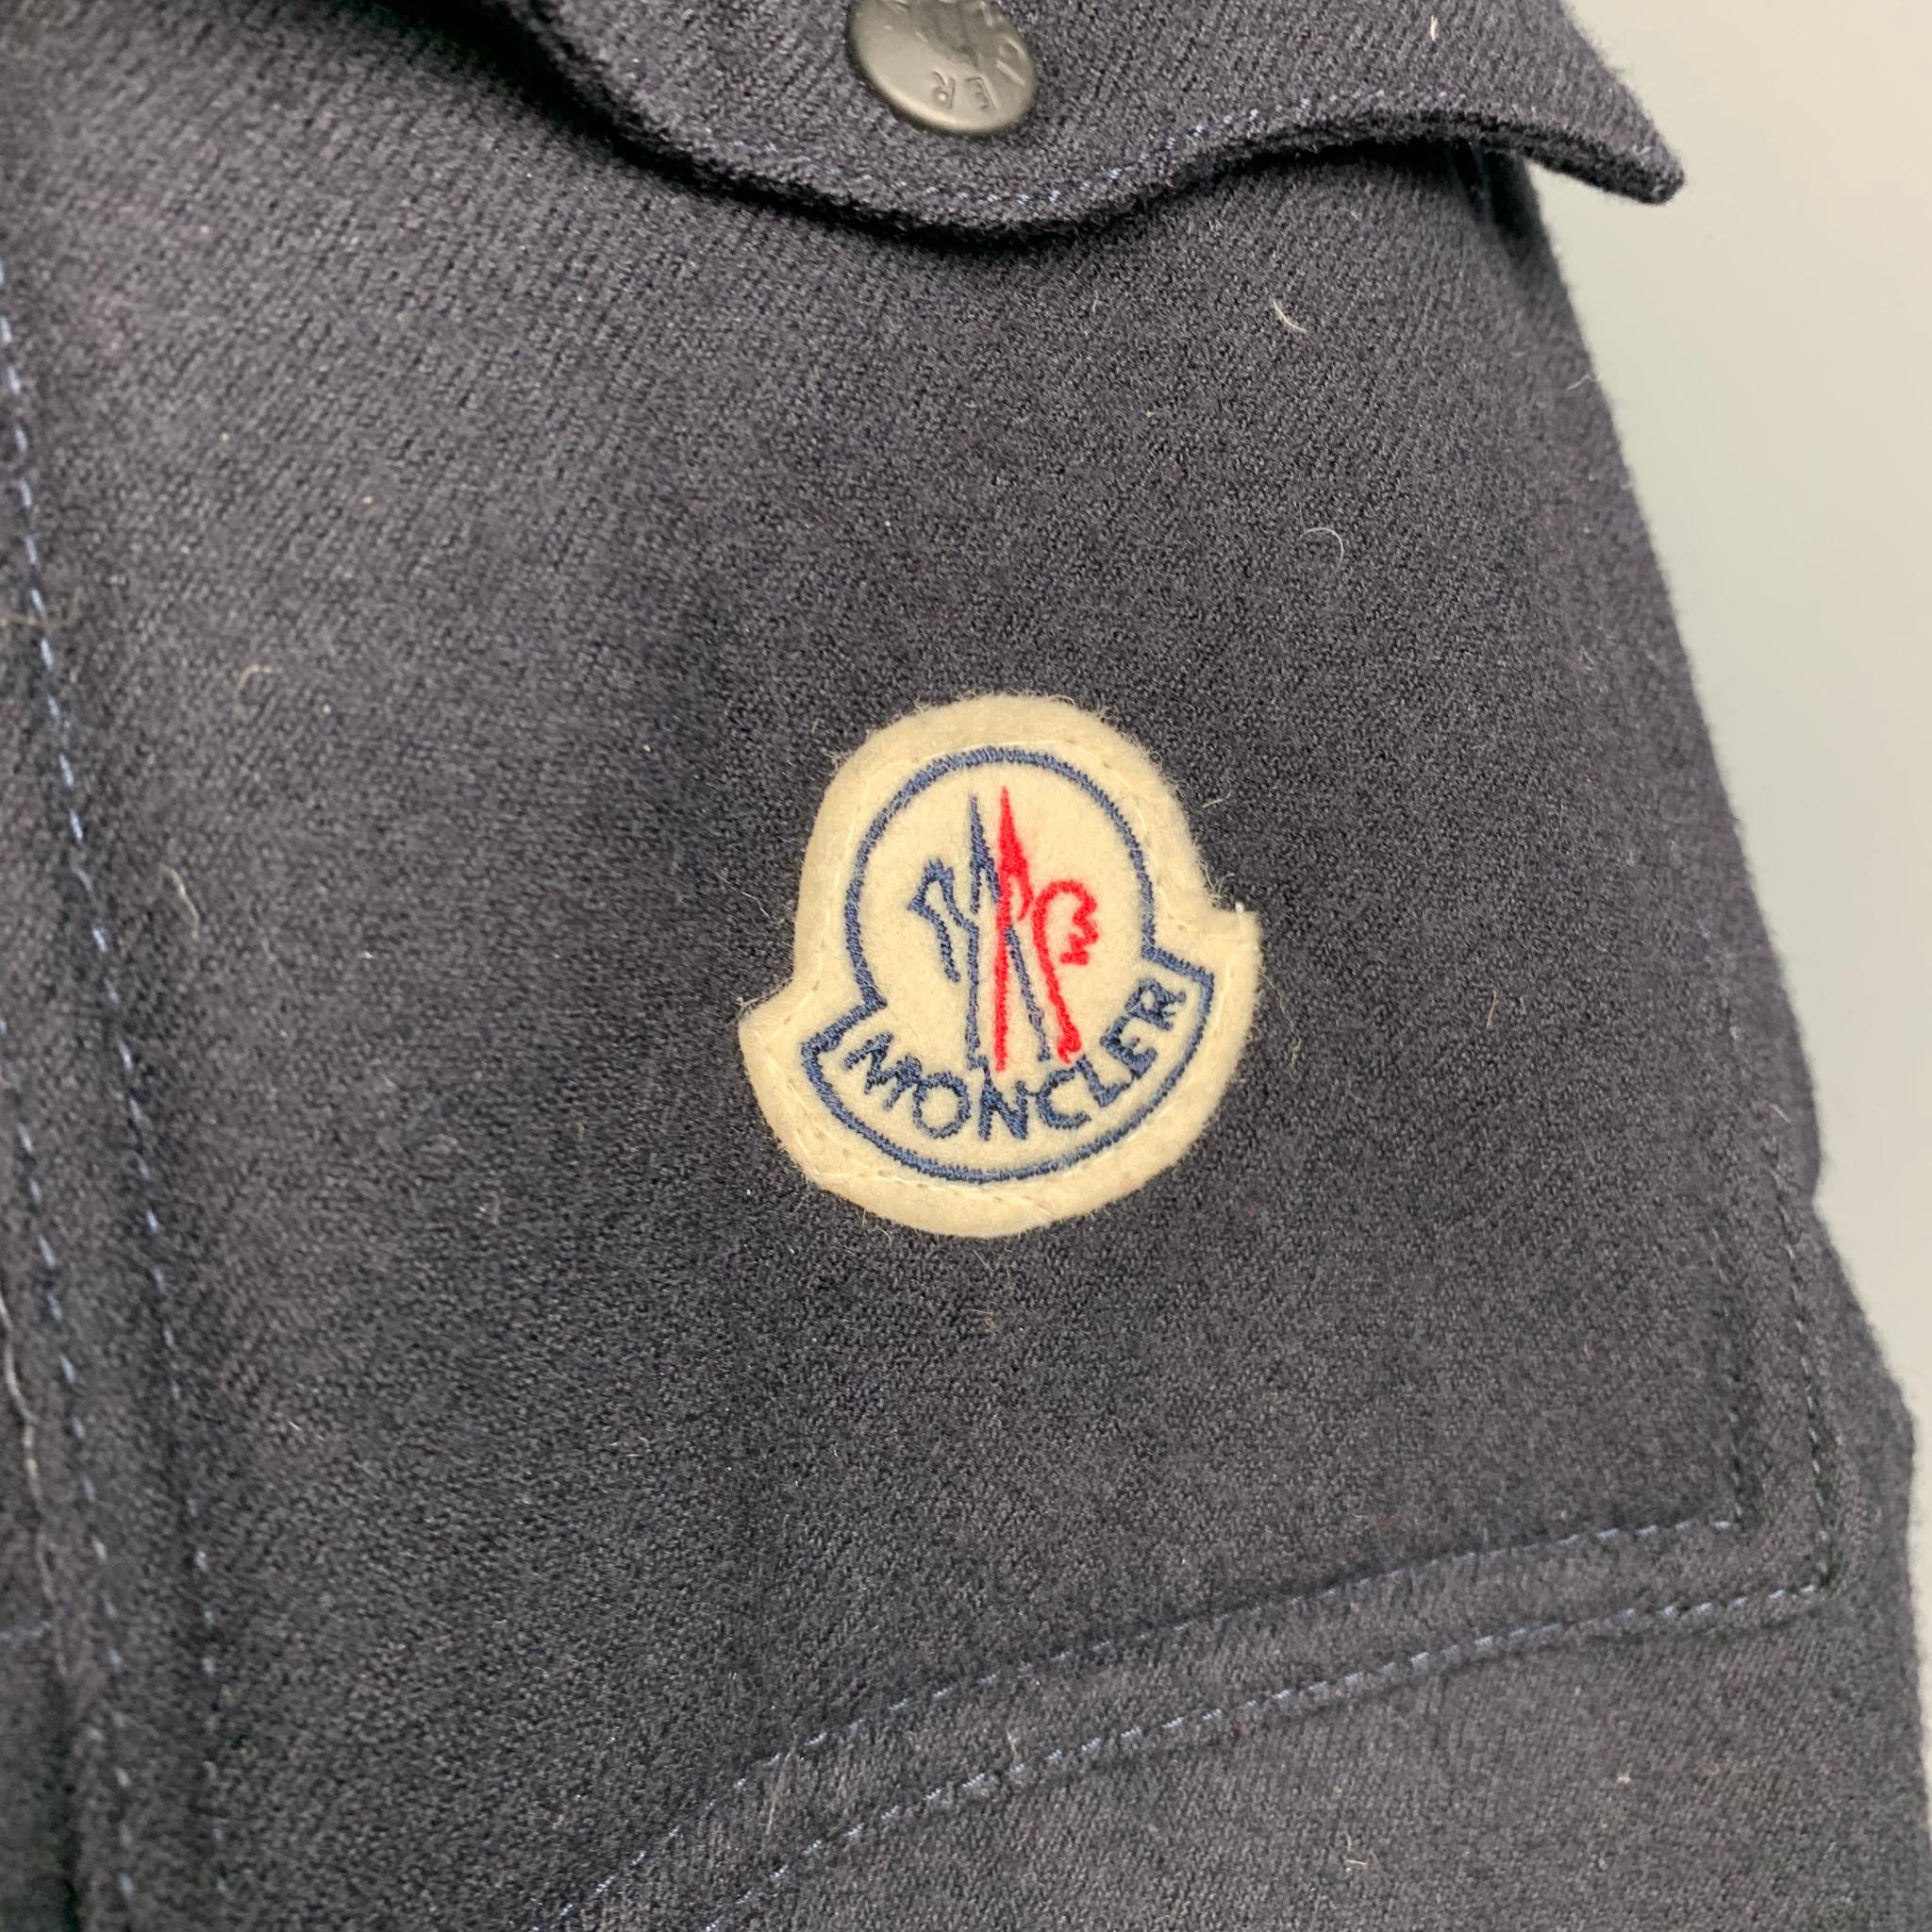 MONCLER parka comes in a navy quilted wool, down filled featuring featuring a hooded style with a removable fur trim, front pockets, and a zip & signature Moncler button closure. Mino wear. Made in Italy.

Very Good Pre-Owned Condition.
Marked: